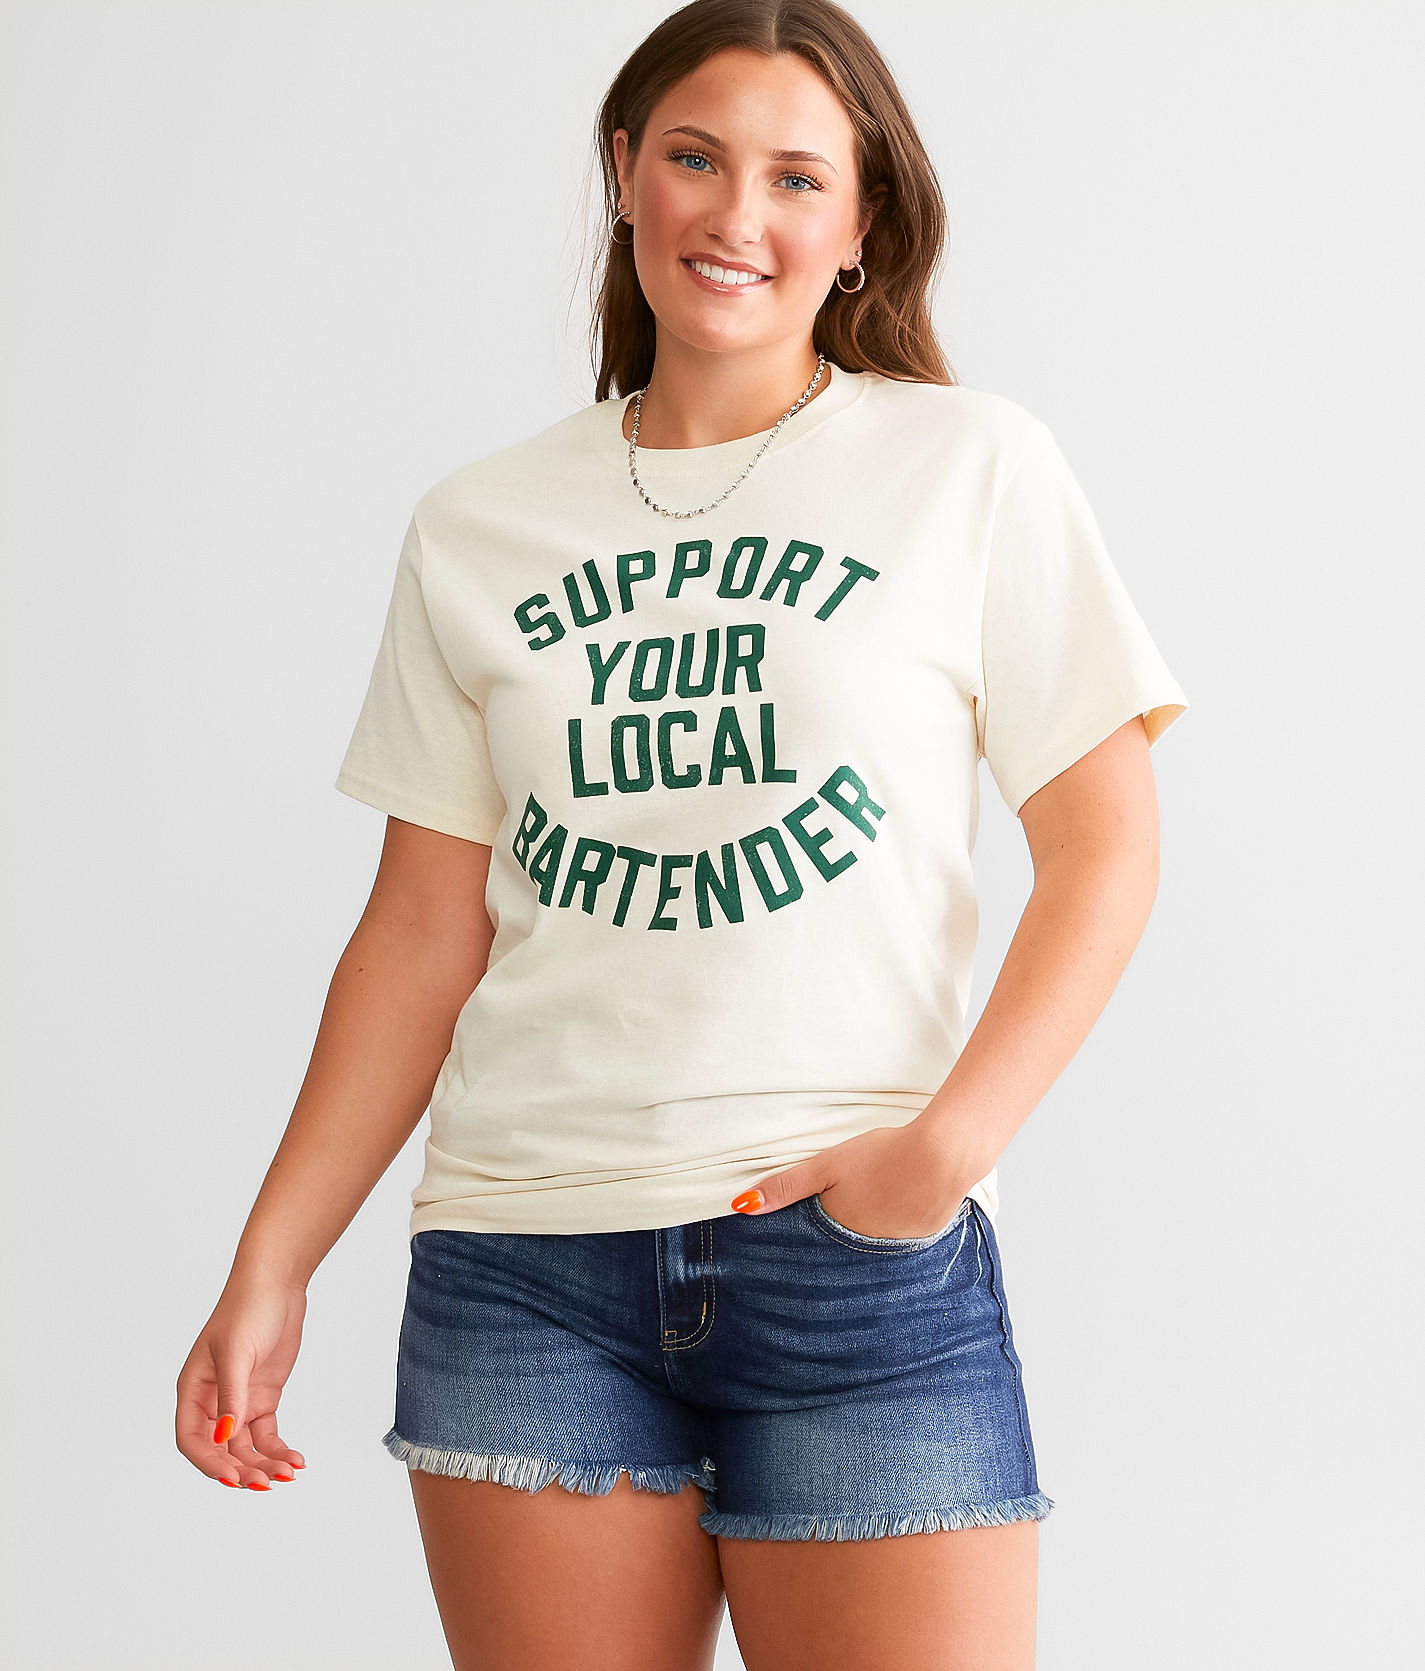 Brew City Support Your Local Bartender T-Shirt - Cream Small, Women's